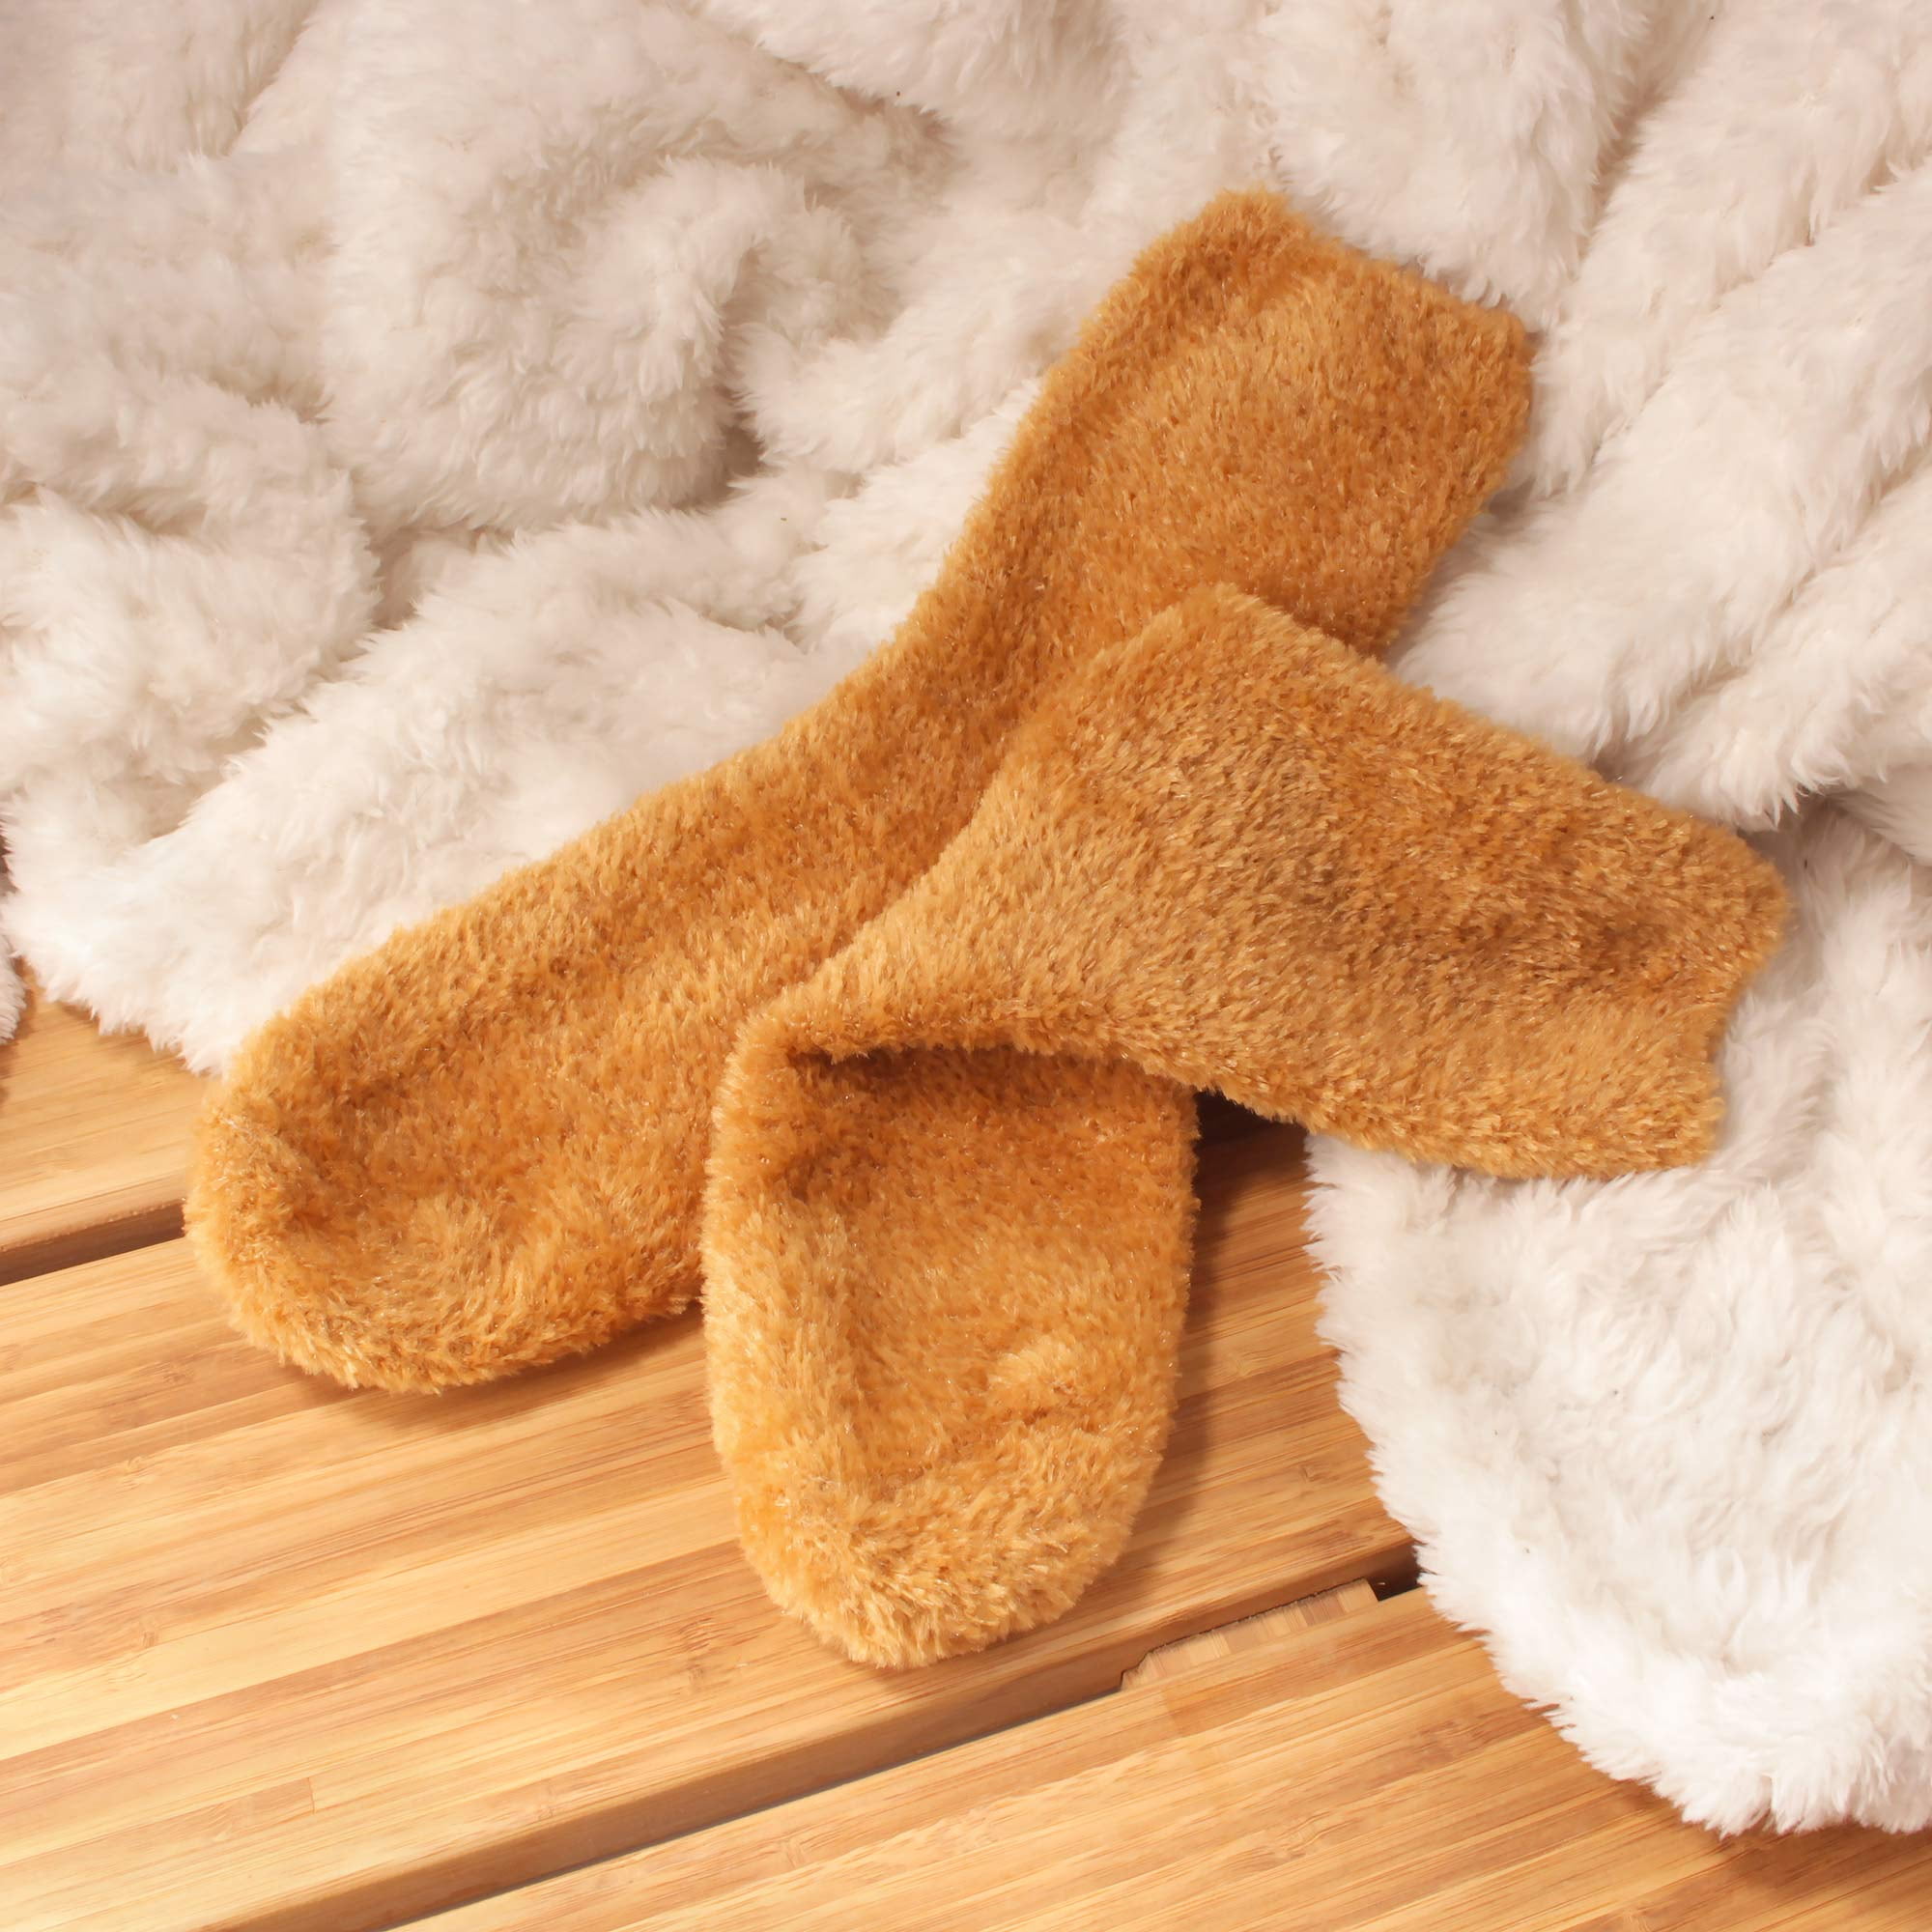 Women's Super Soft and Cozy Feather Light Fuzzy Socks - Cream